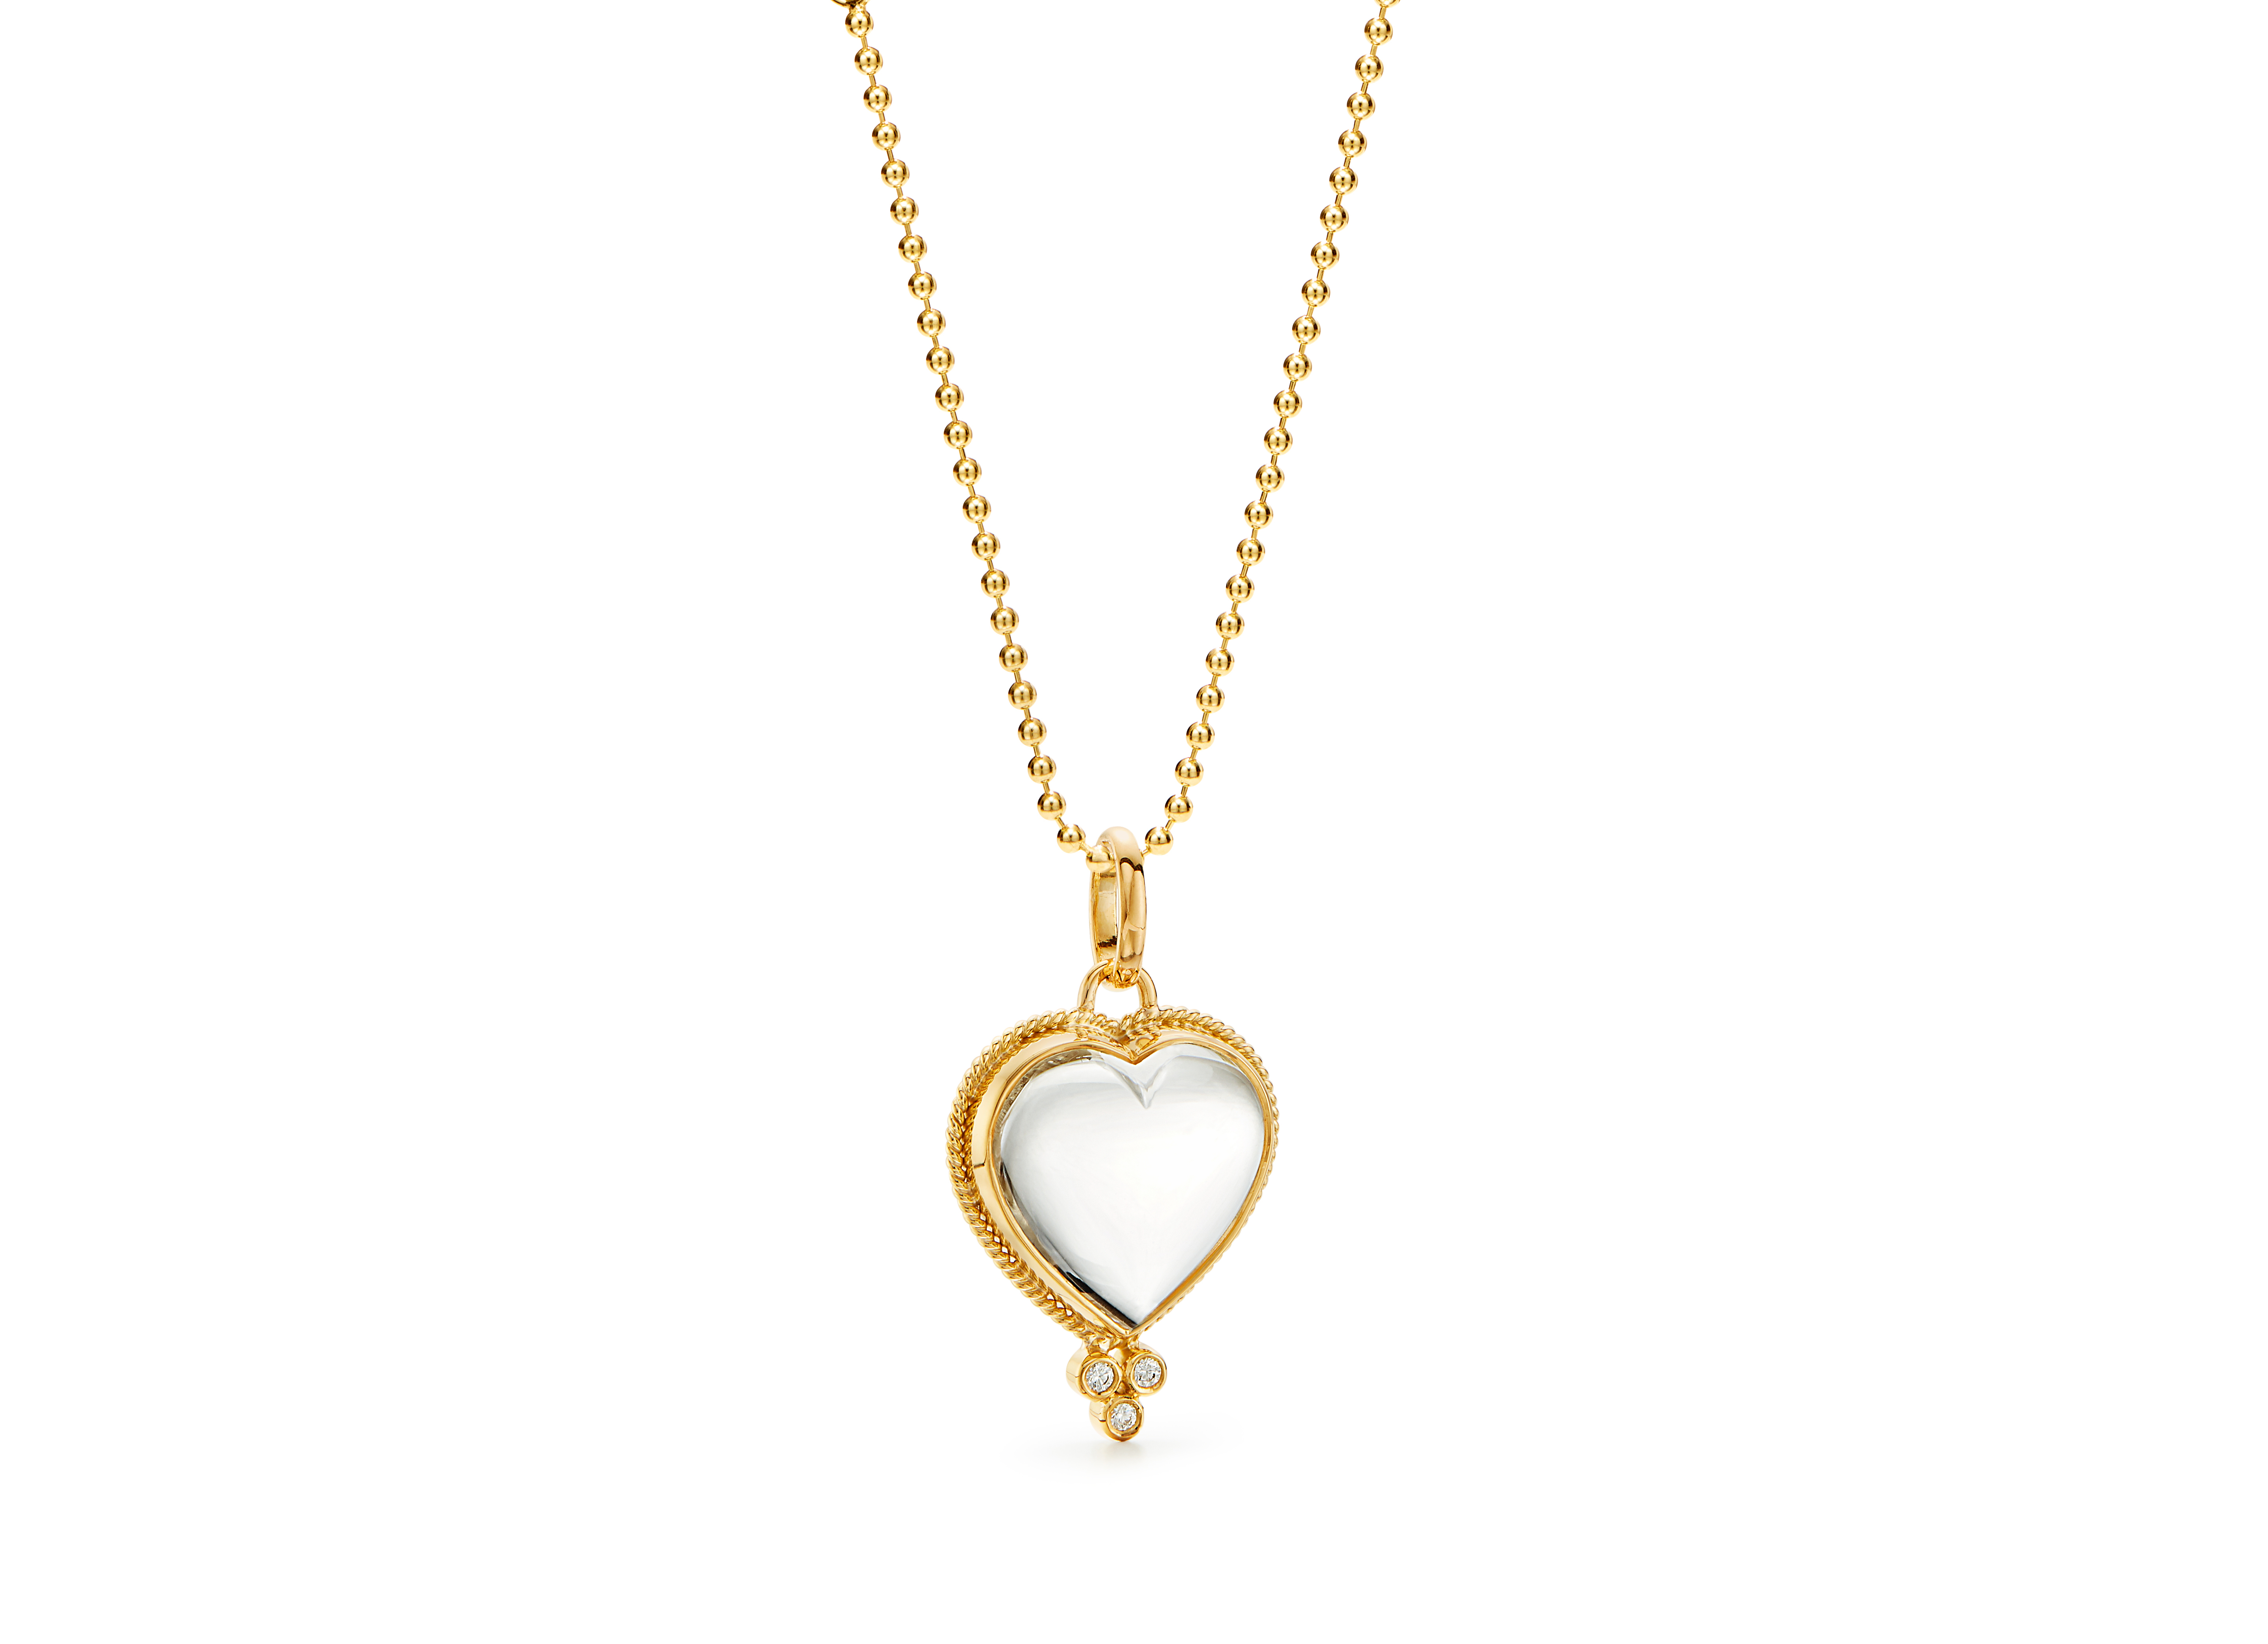 Crystal Ball with Hearts Pendant Necklace & Chain 